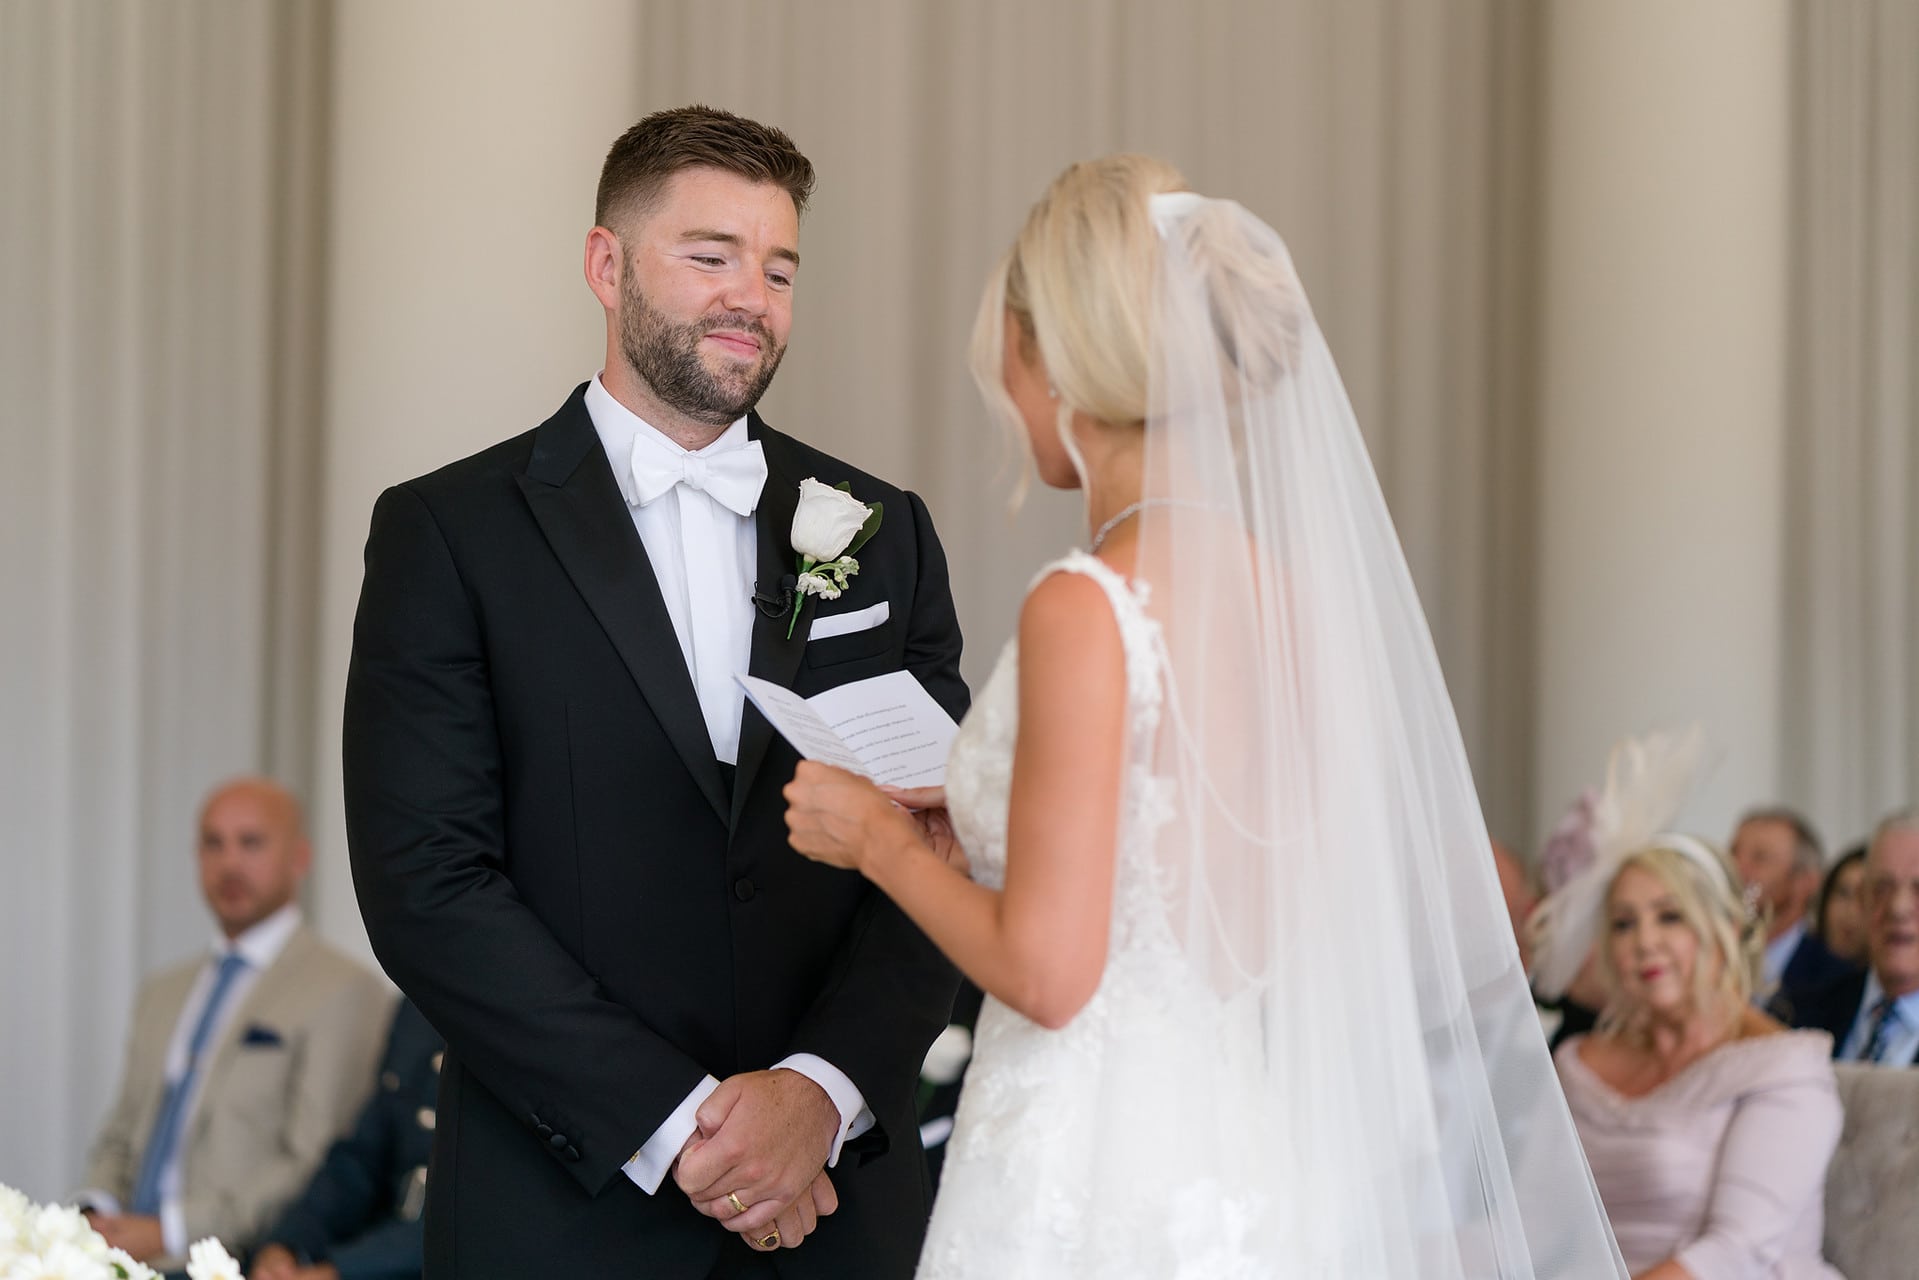 Groom looking lovingly at bride as she makes her vows